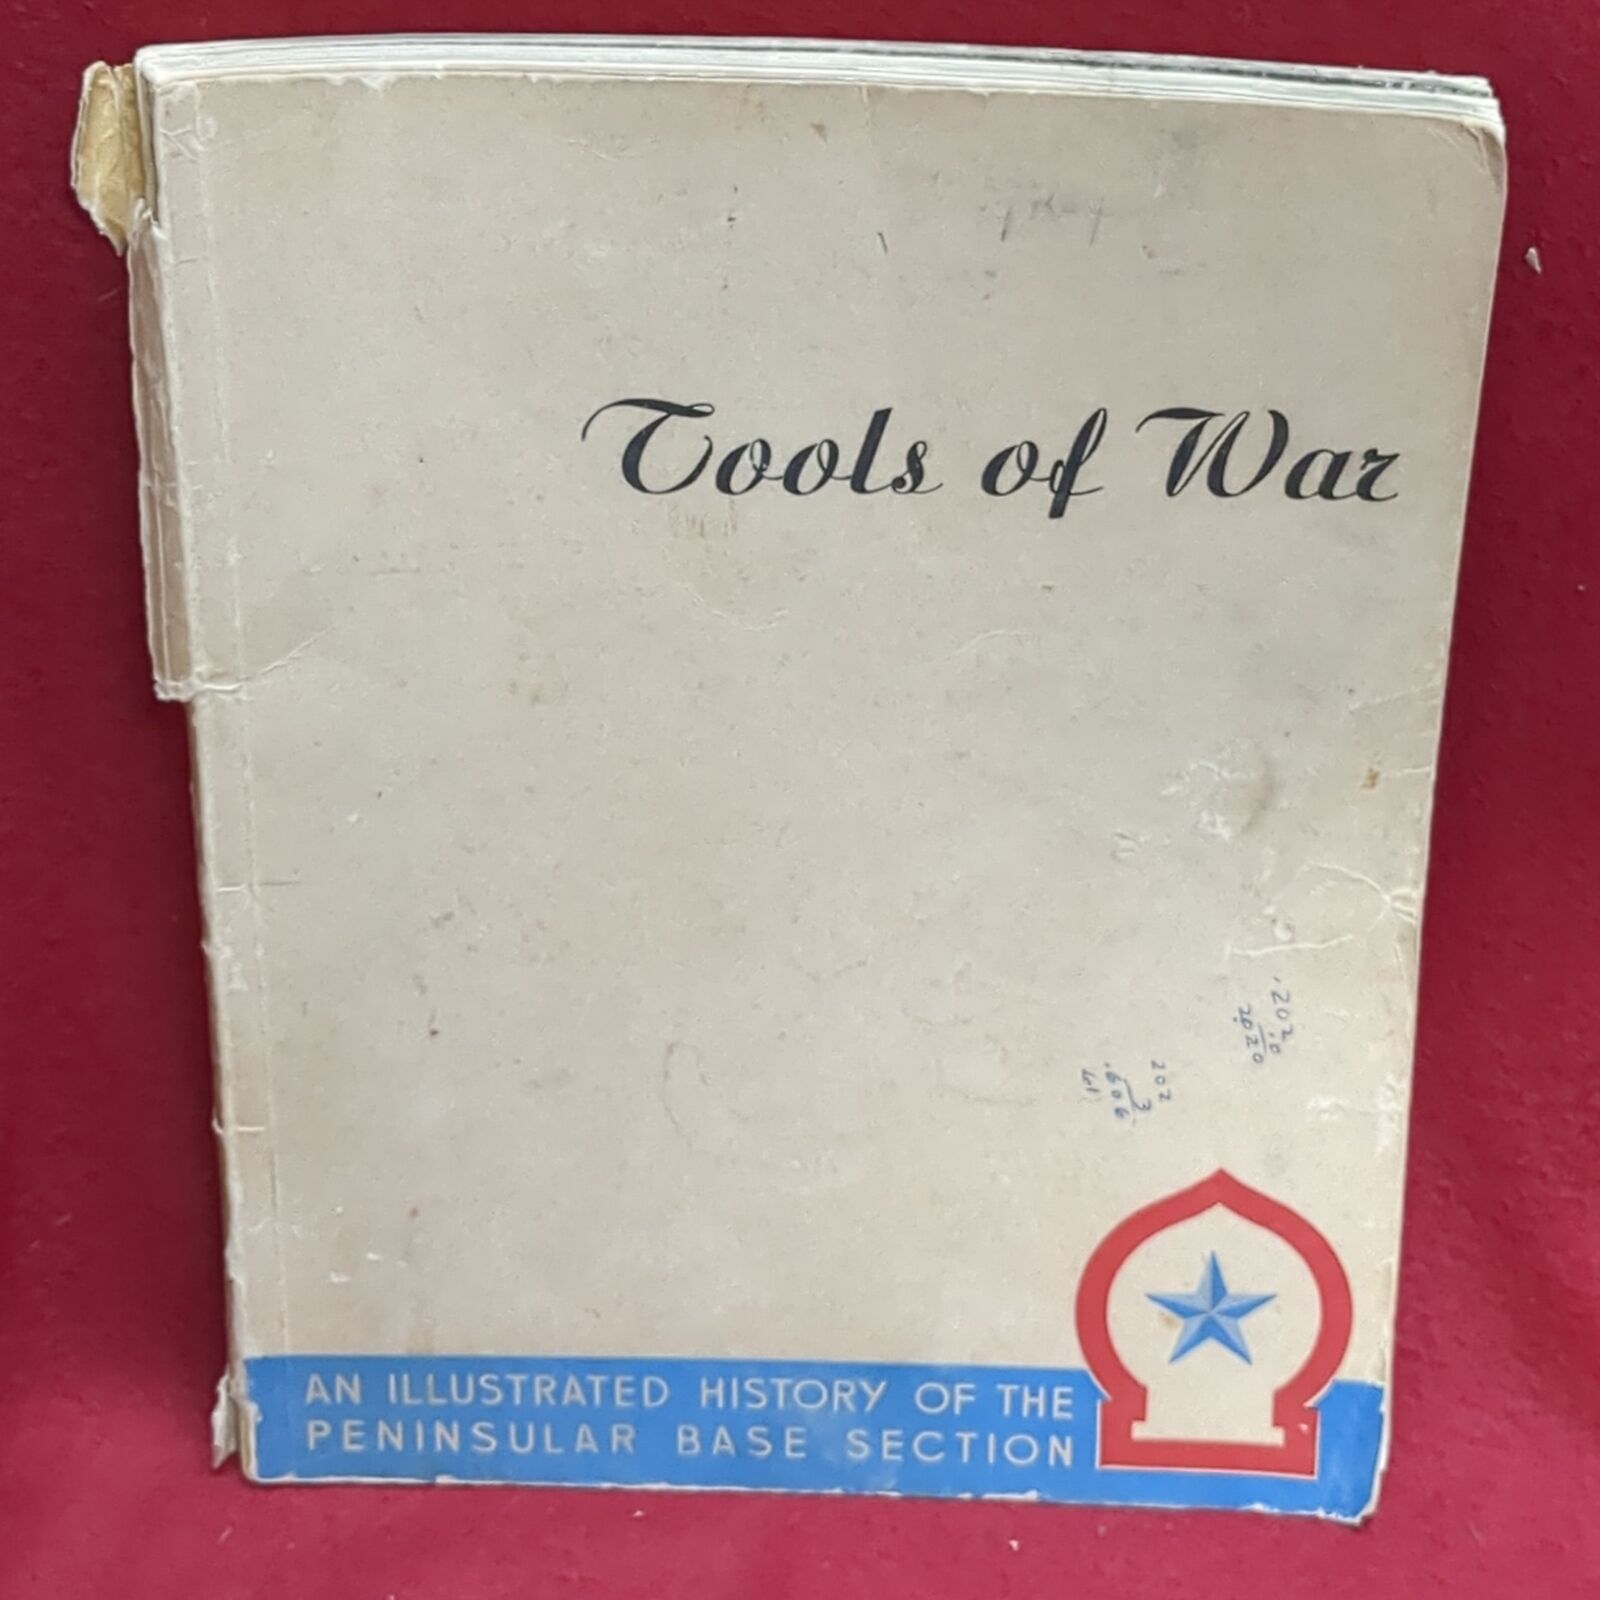 BOOK - TOOLS OF WAR: AN ILLUSTRATED HISTORY OF TH E PENINSULAR BASE SECTION: DEC